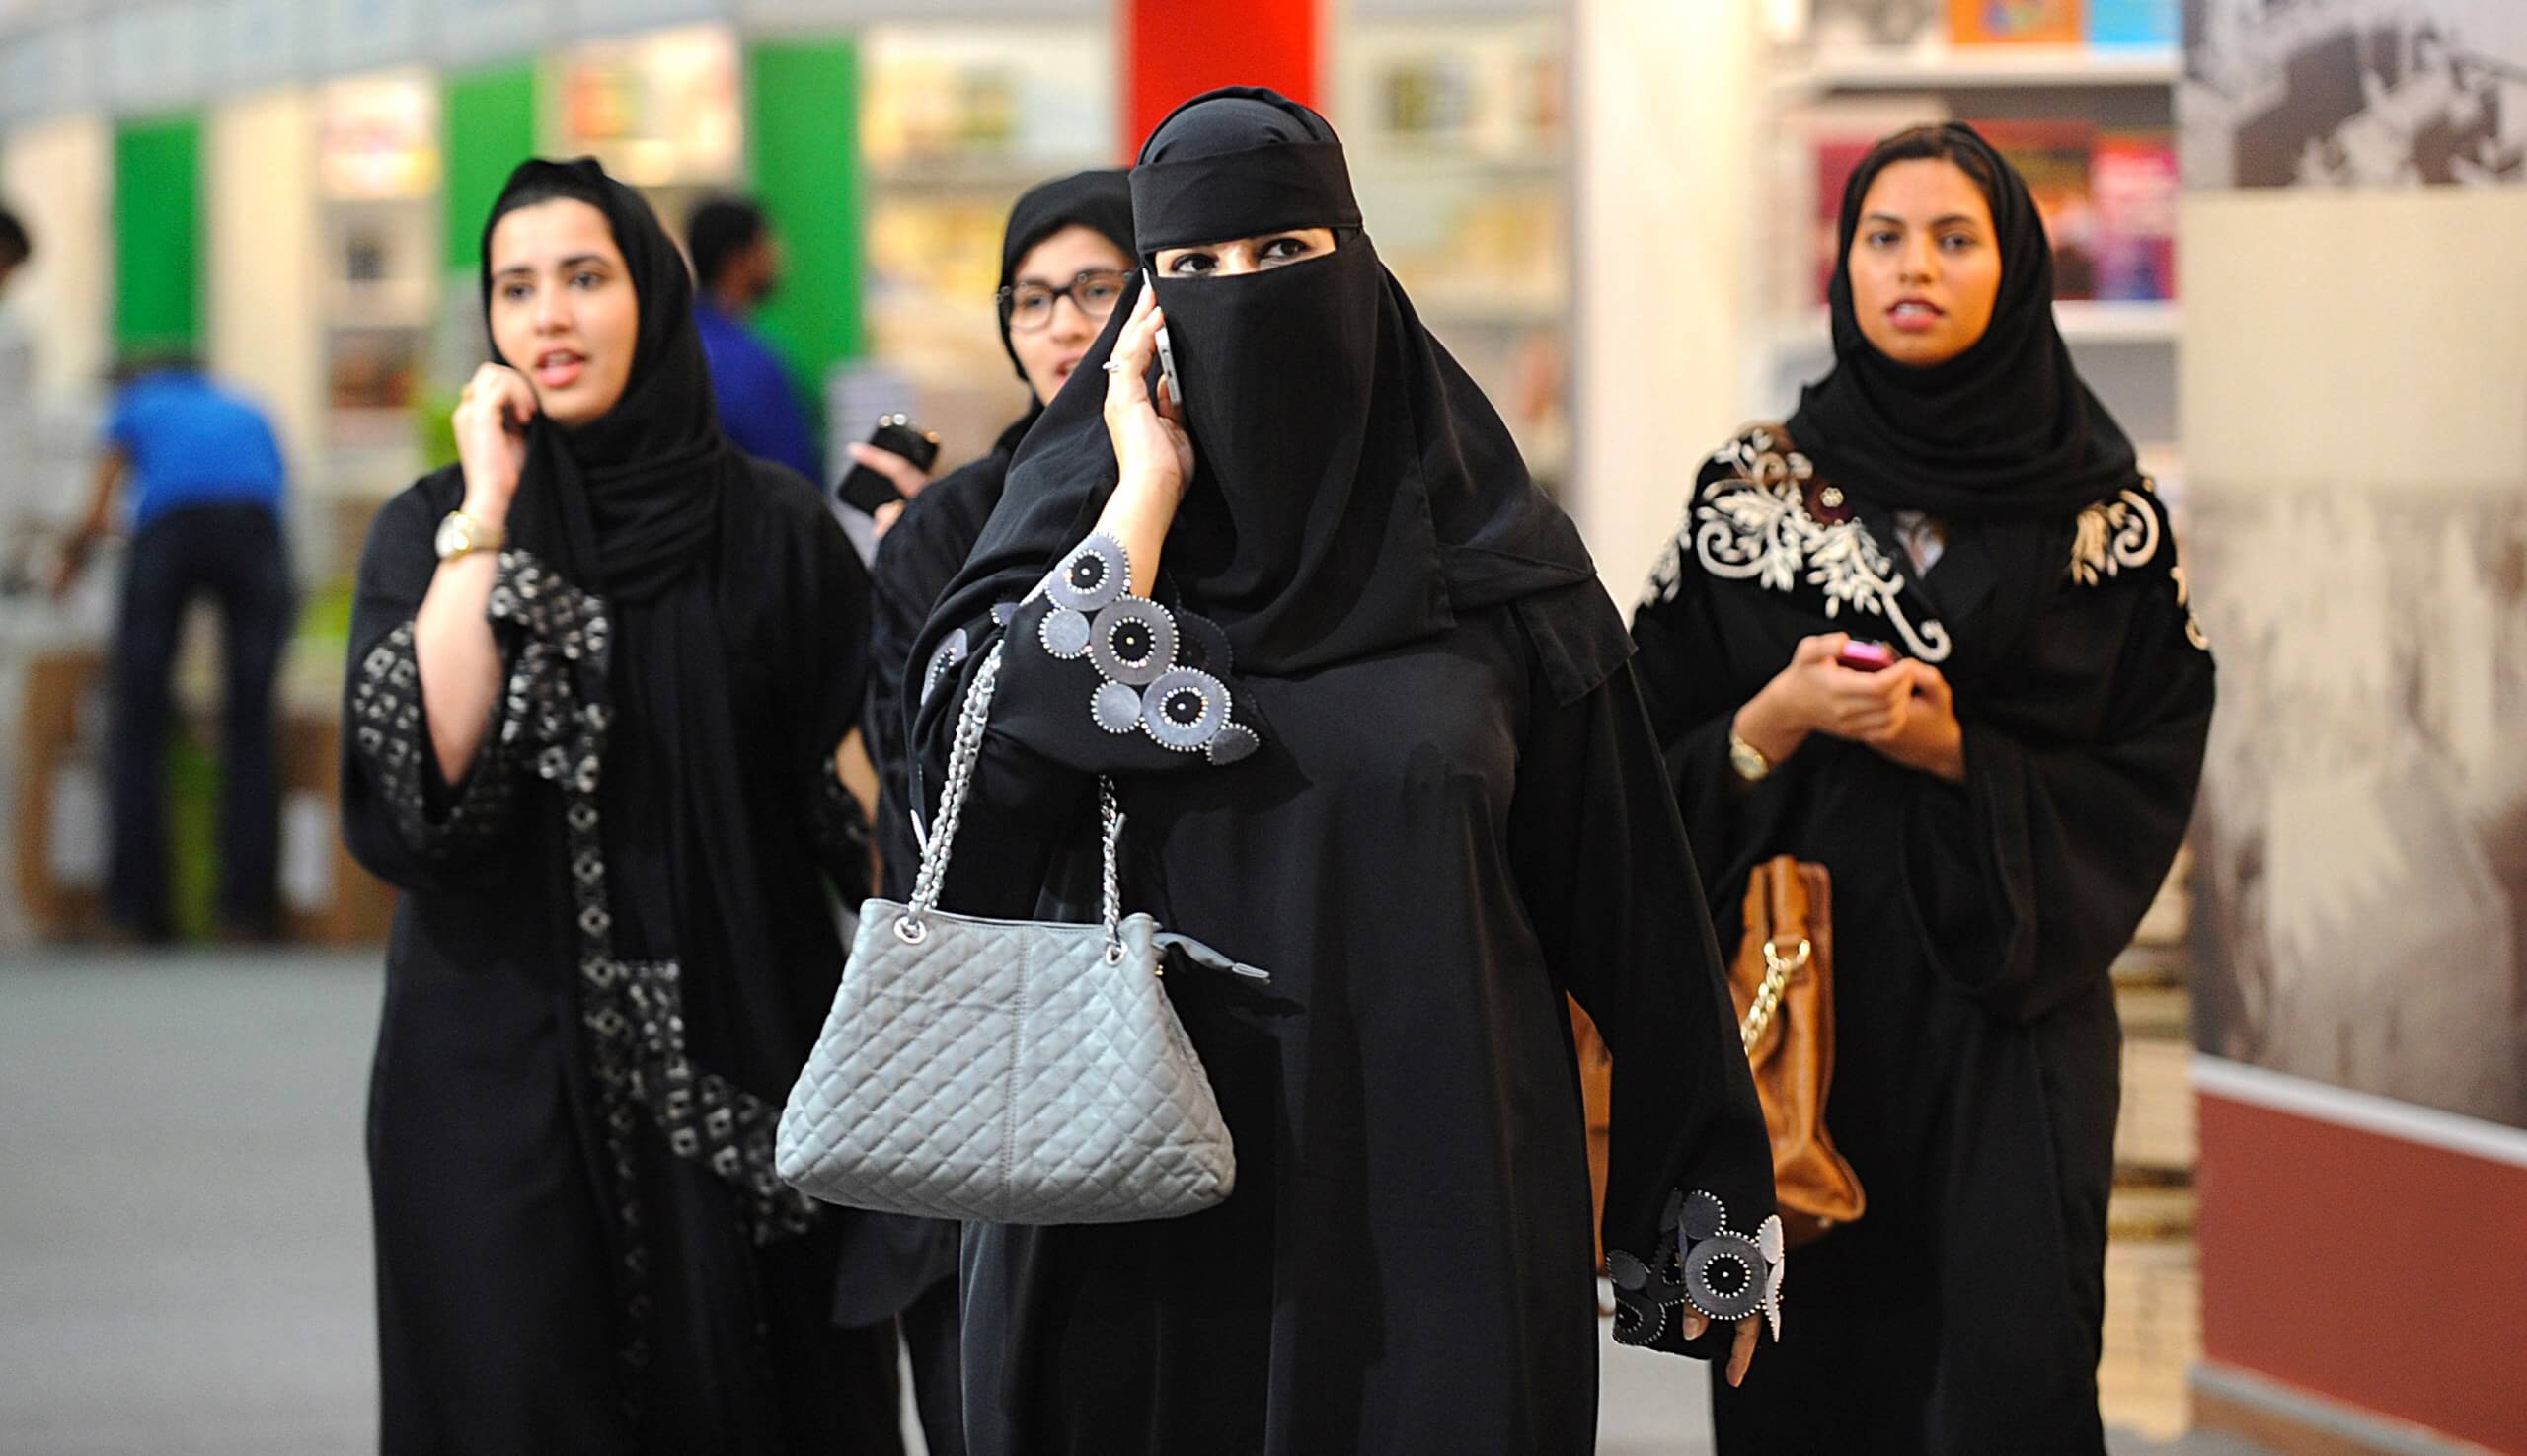 Google refuses to remove controversial 'woman tracking' app in Saudi Arabia, Apple has yet to respond